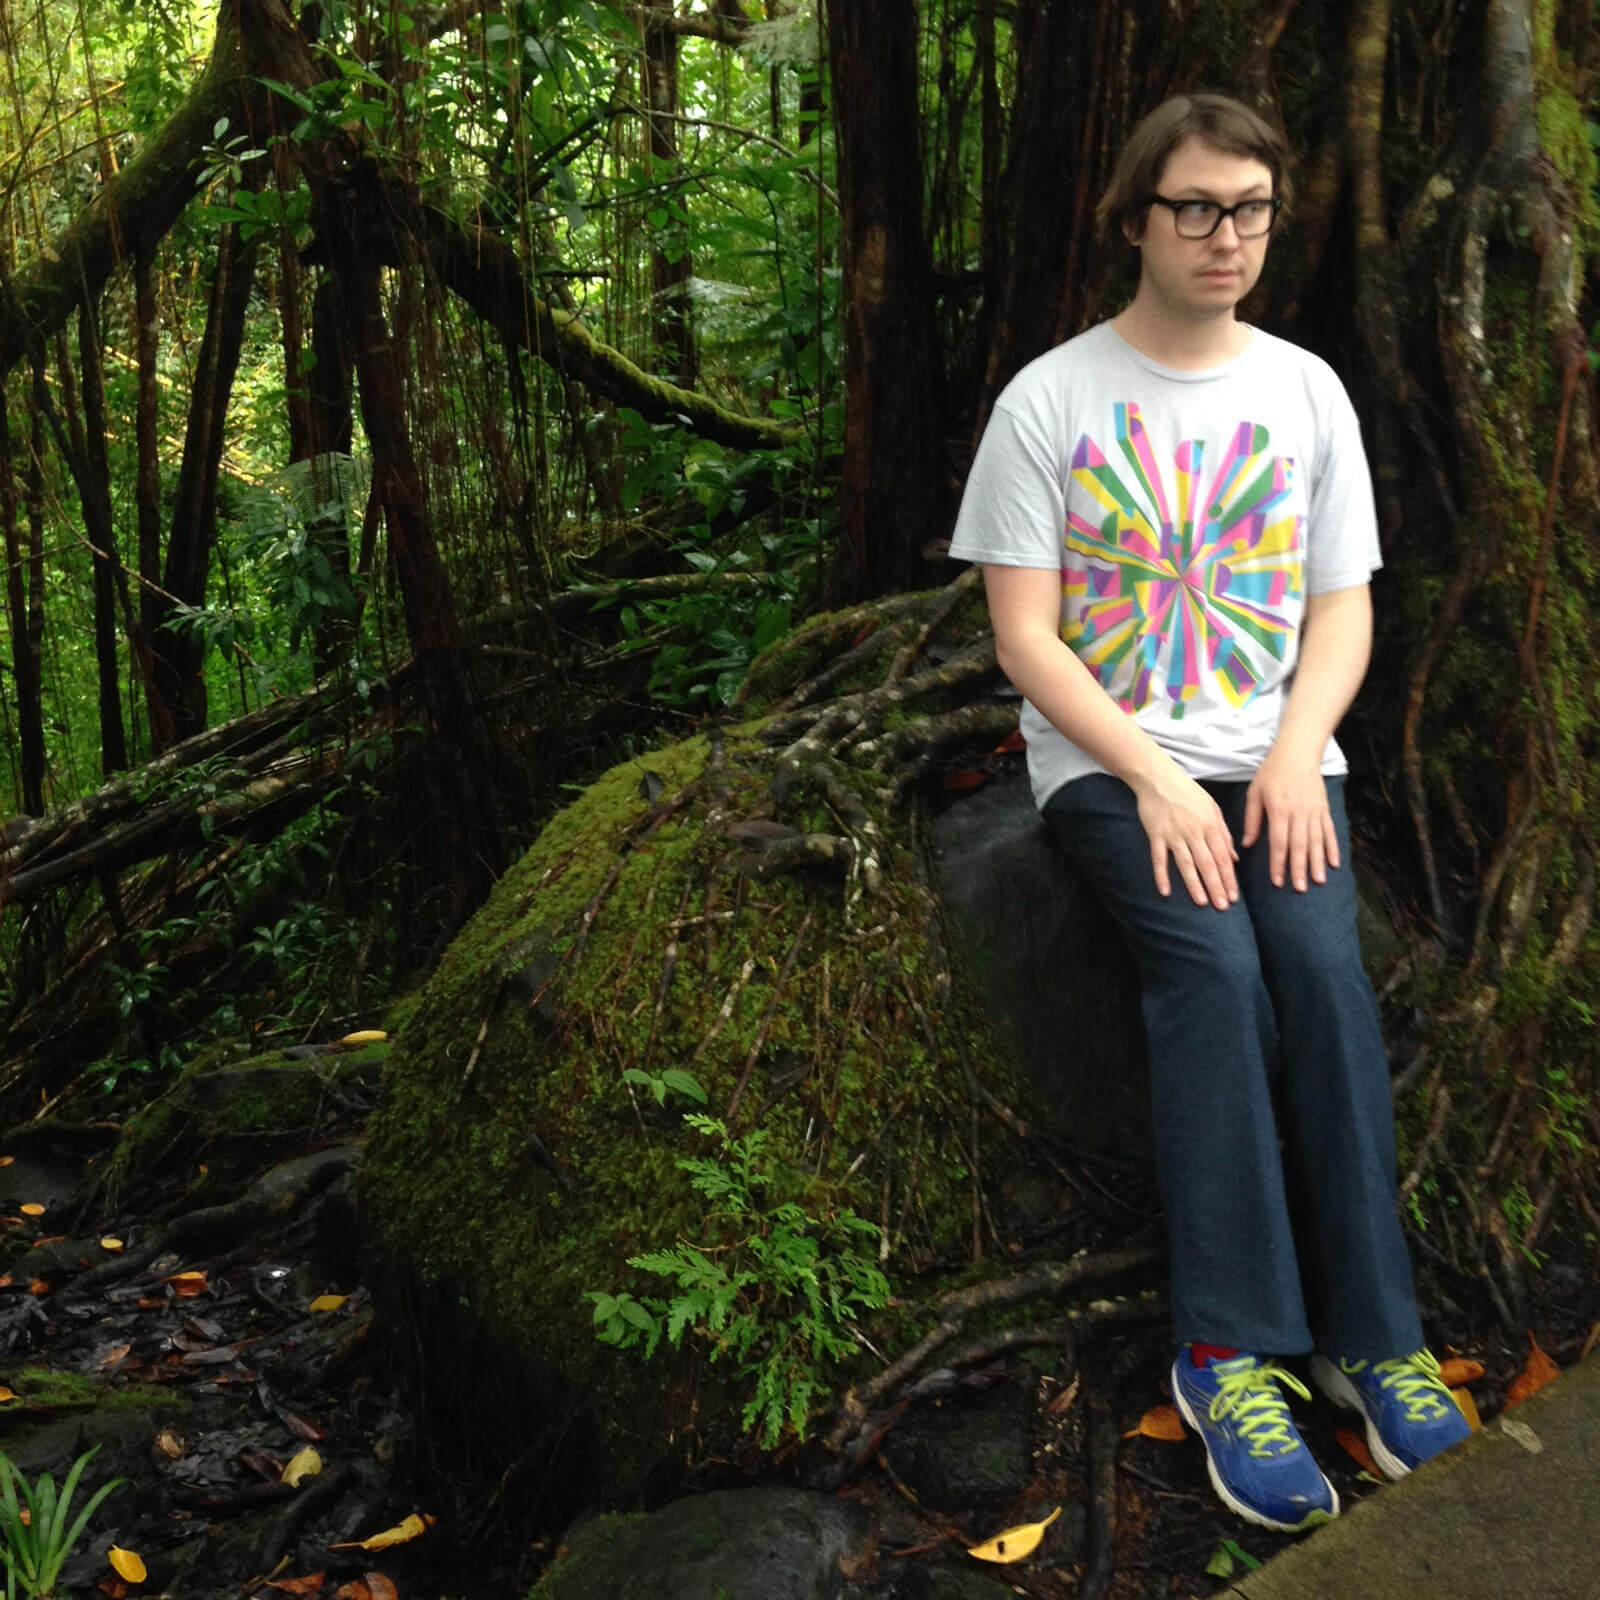 A photograph of Wiley Wiggins at the edge of a rainforest